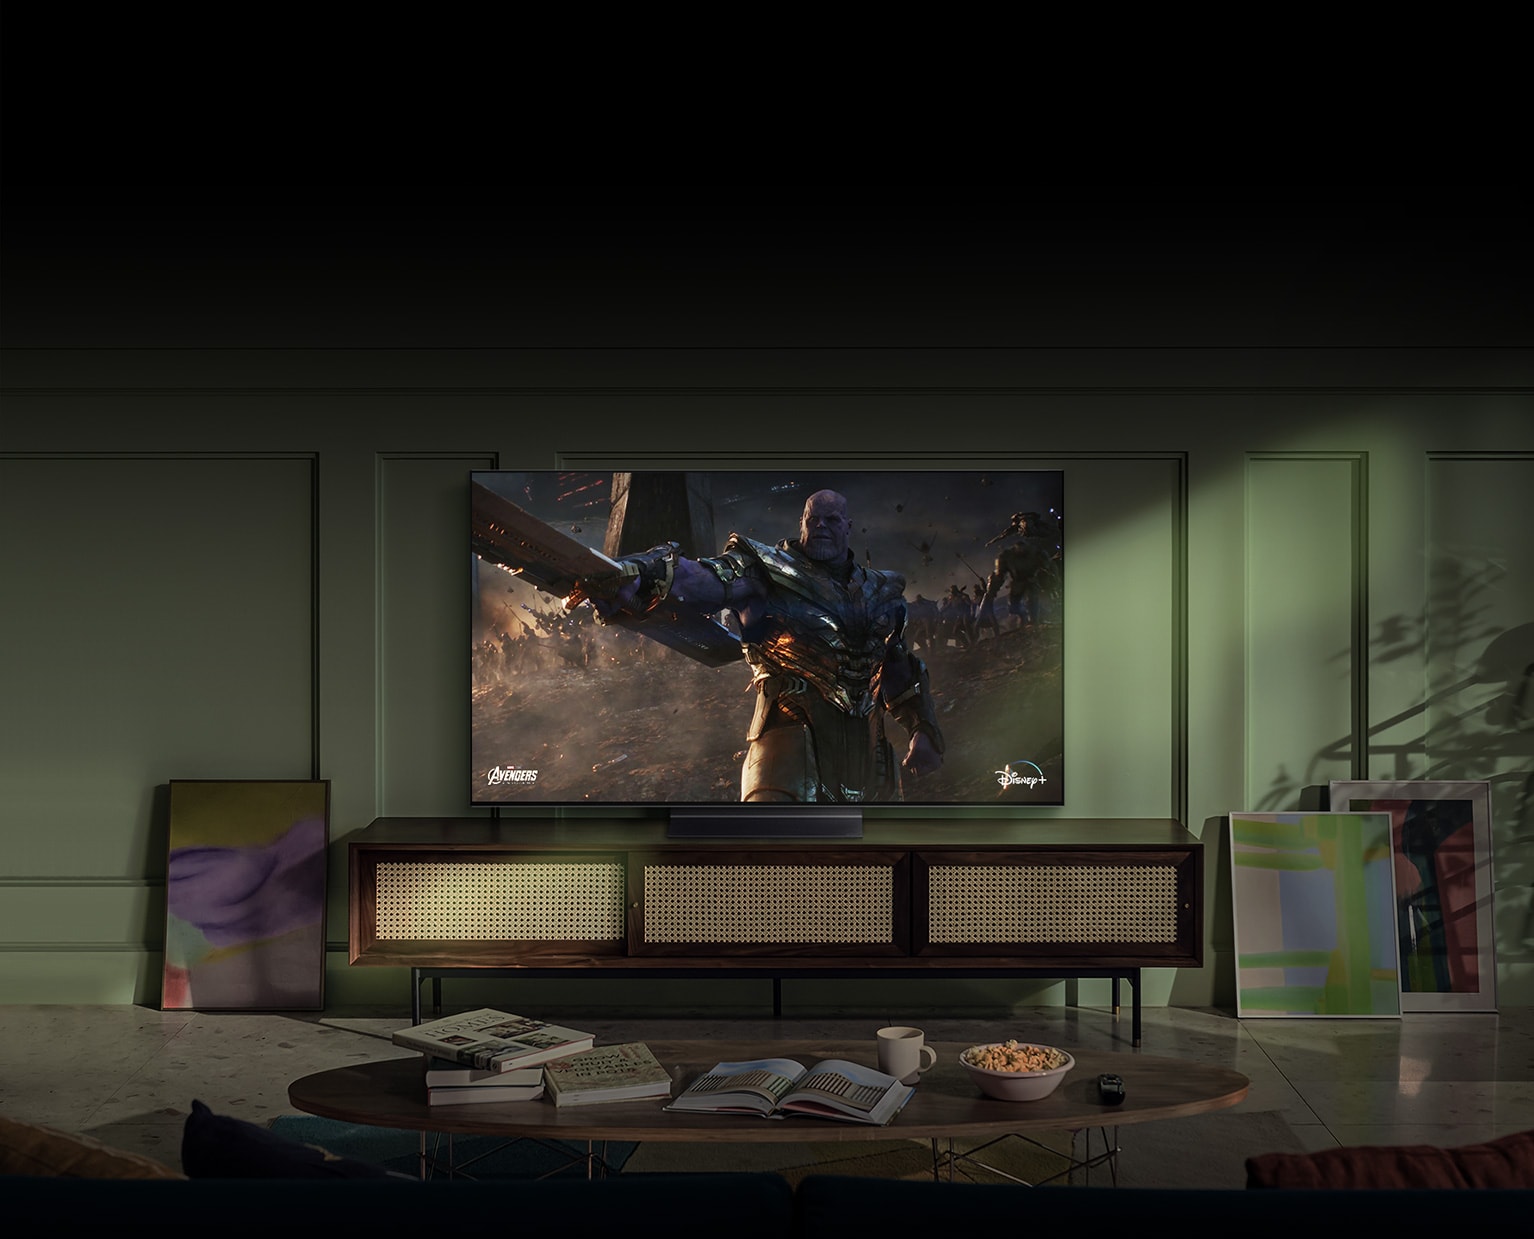 A dinosaur jumps through the screen of the LG OLED television while the scene comes to life in the room